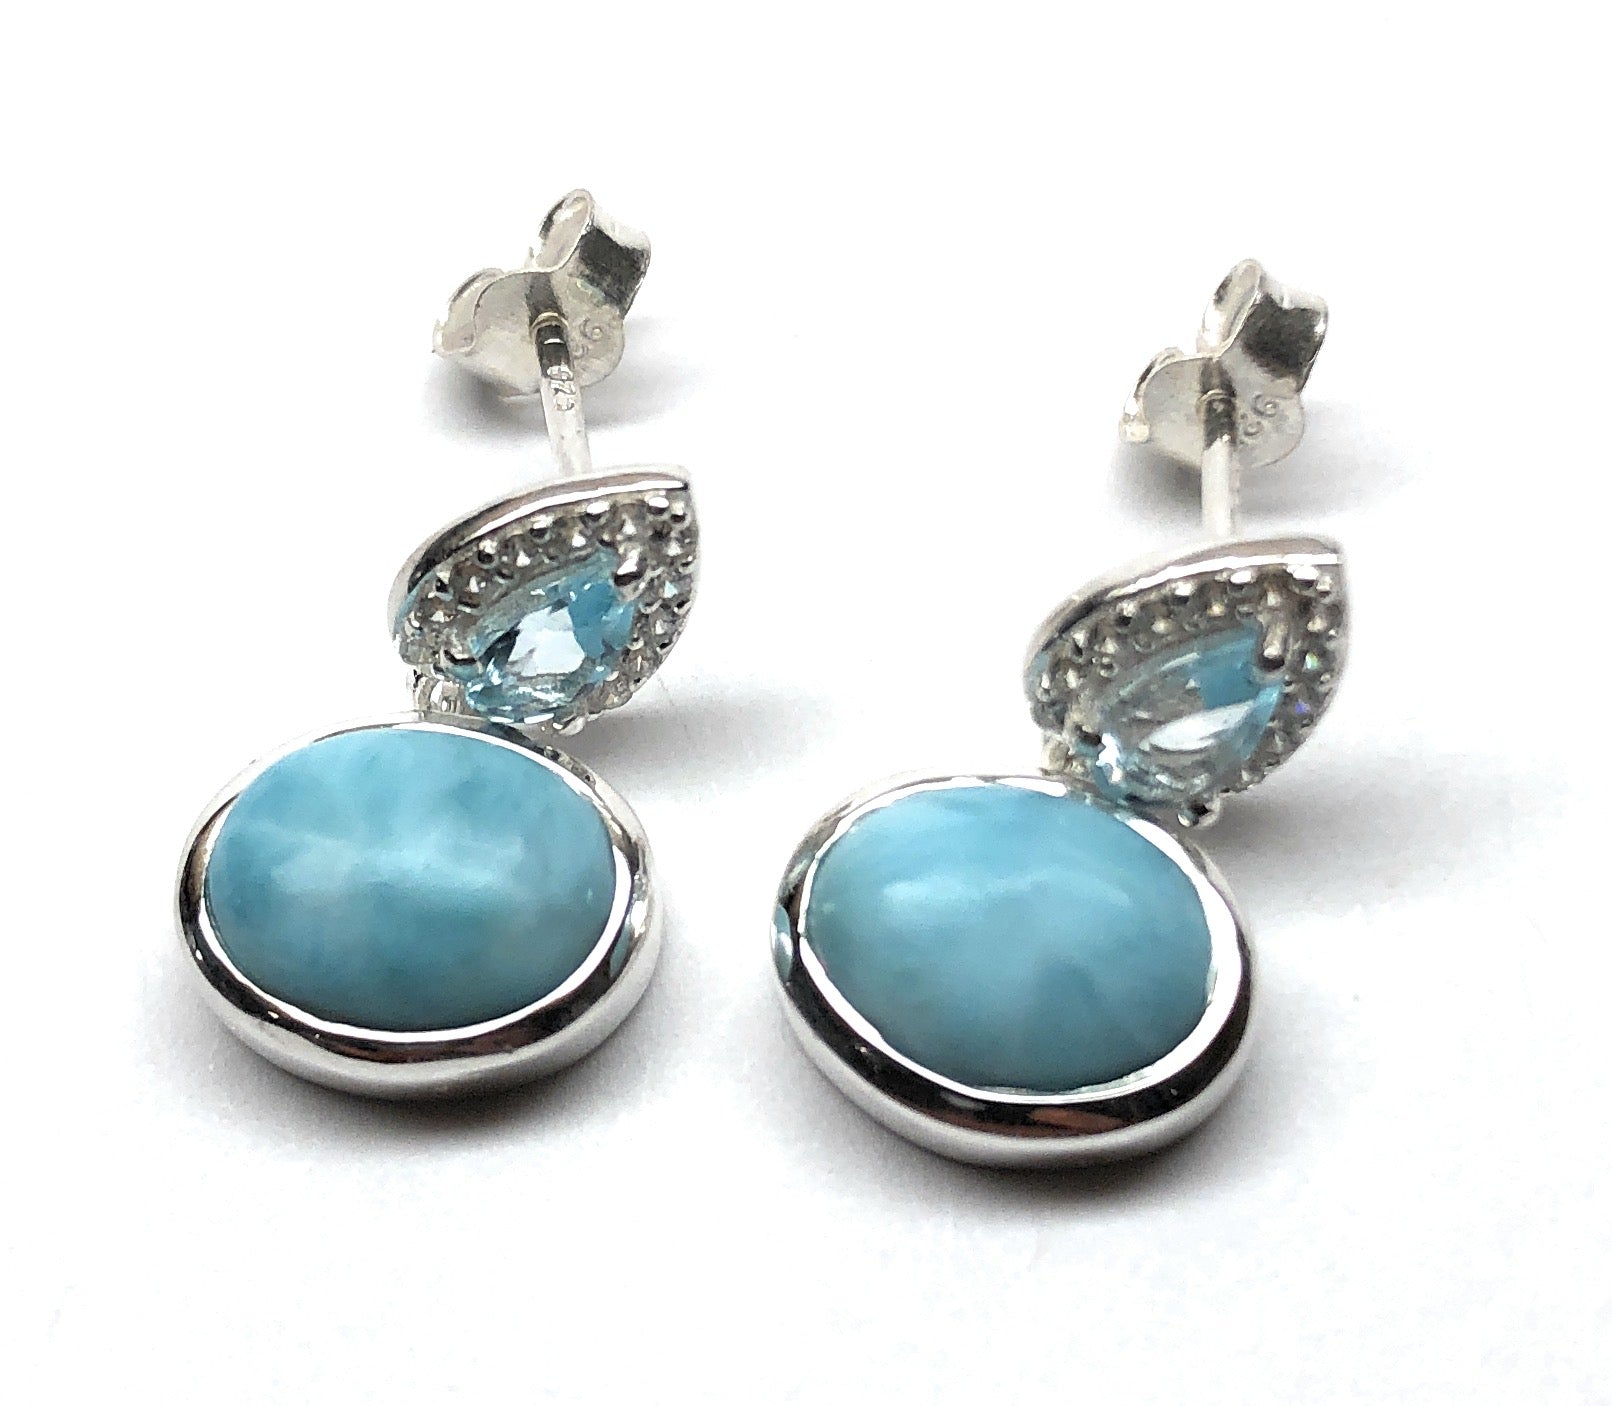 Natural Dominican Larimar, Blue Topaz 925 Solid Sterling Silver Earrings 15mm - Natural Rocks by Kala